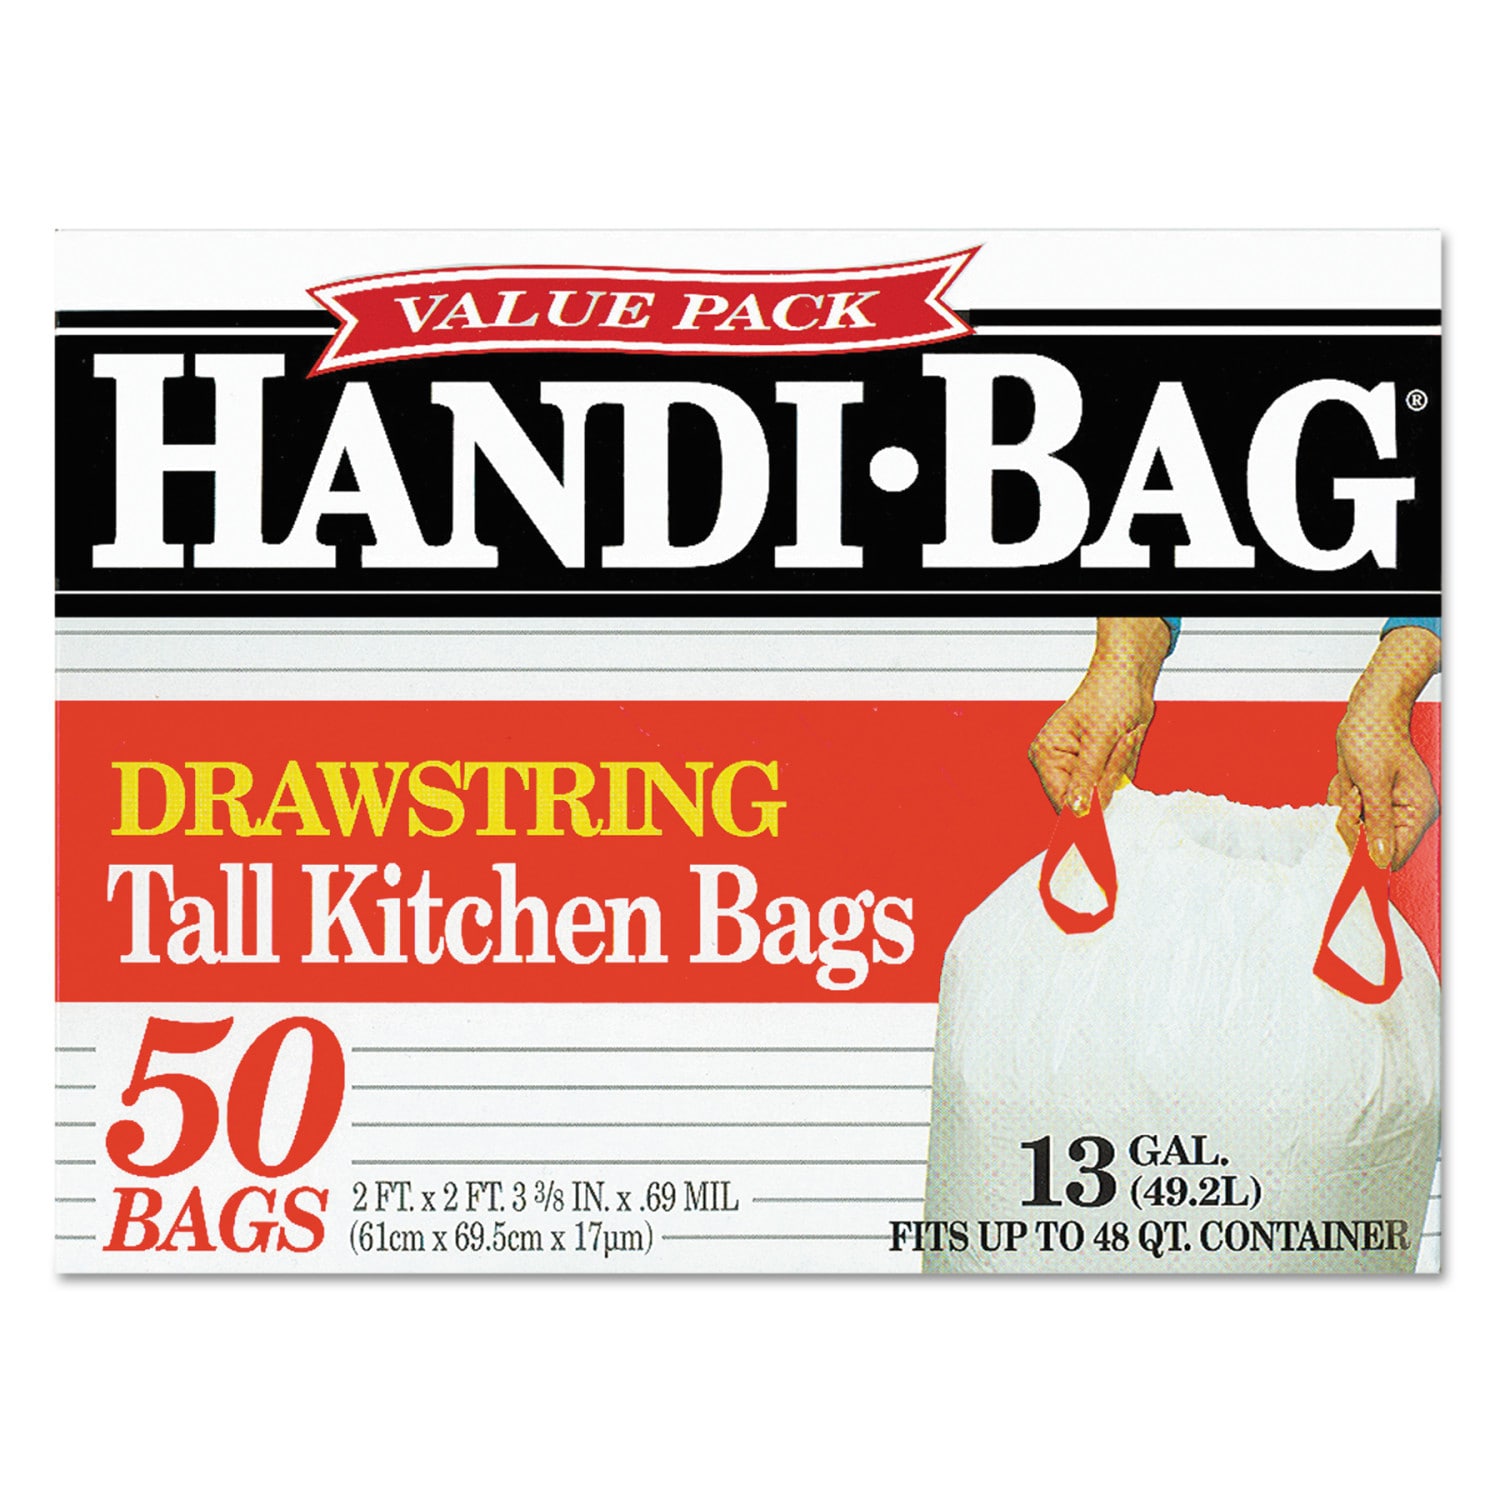 Kirkland Signature Smart Tie Kitchen Bags - Garbage Bags - Garbage &  Recycling